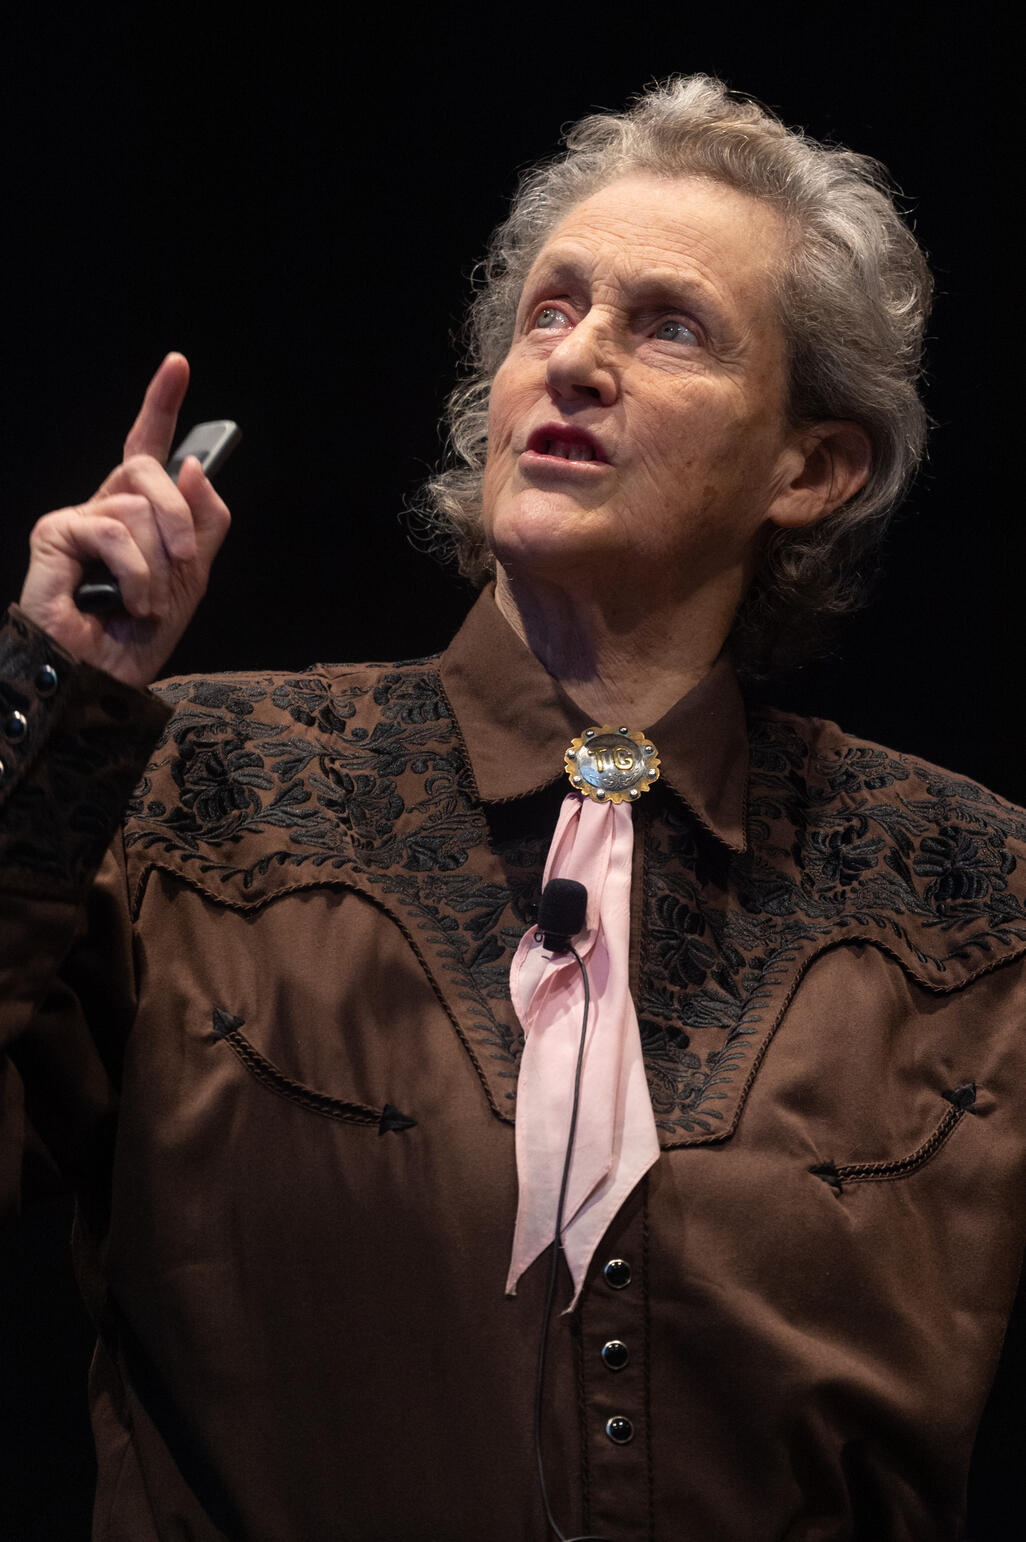 Temple Grandin speaking to an audience.